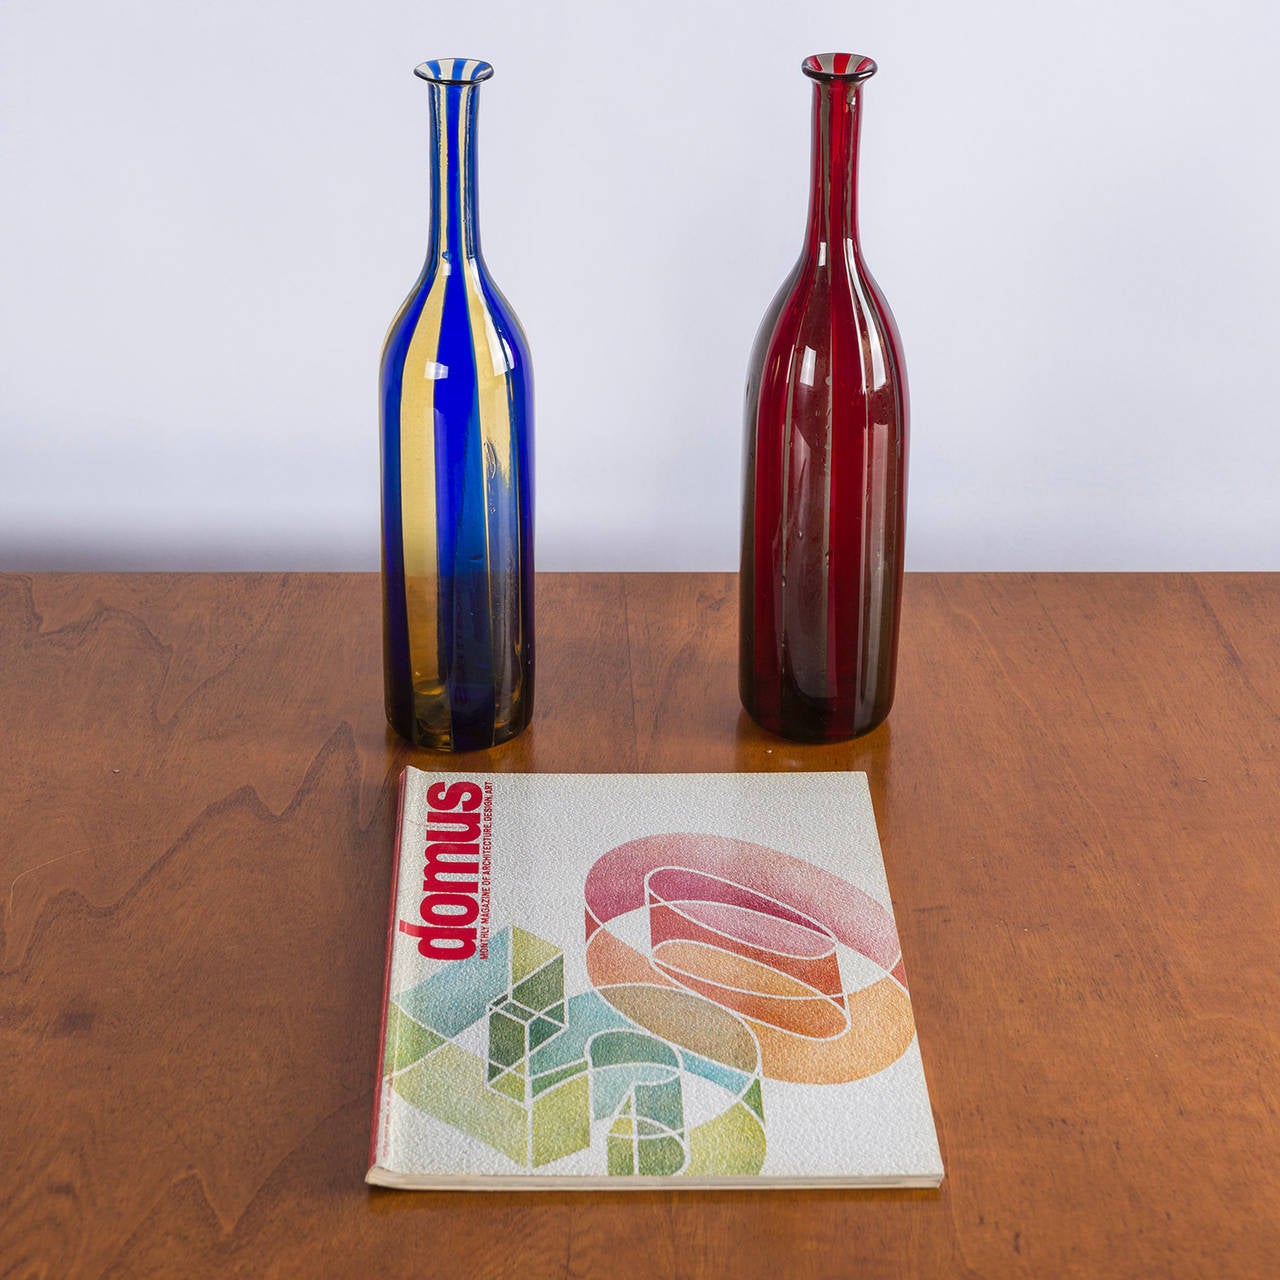 Rare Set of Two Murano Glass Bottles by Fulvio Bianconi and Paolo Venini, 1950s For Sale 5